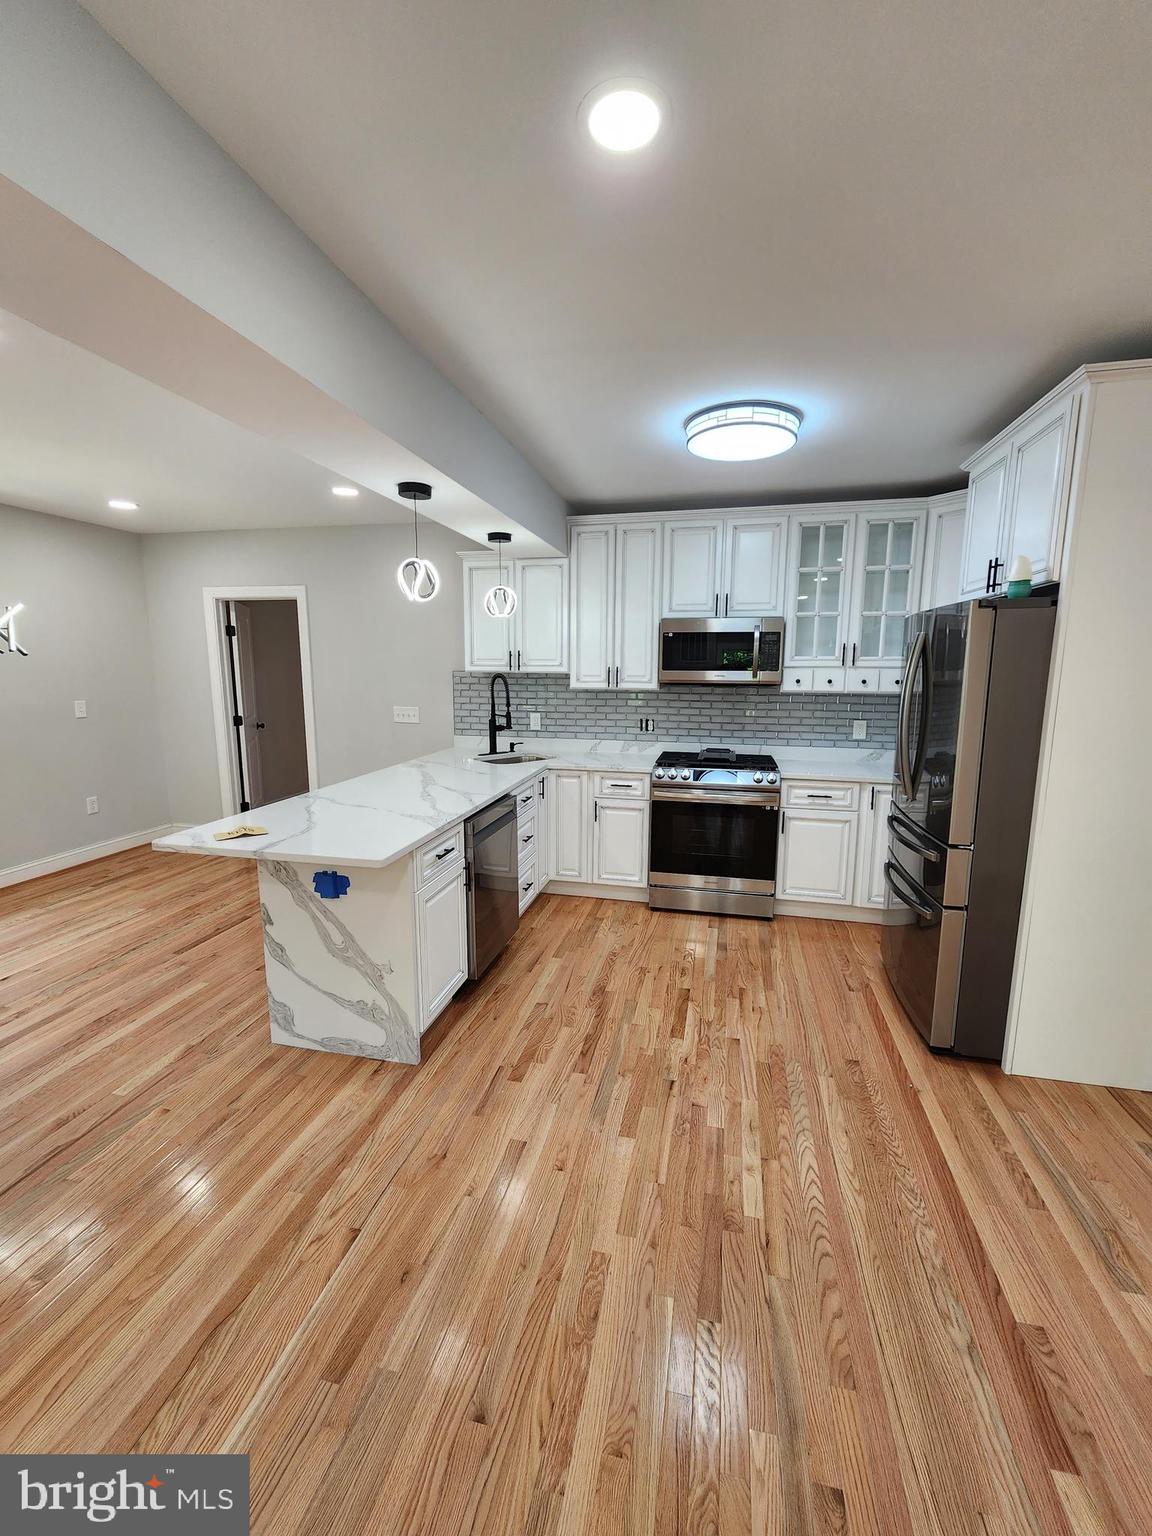 a large kitchen with a stove a sink dishwasher a refrigerator and wooden floor